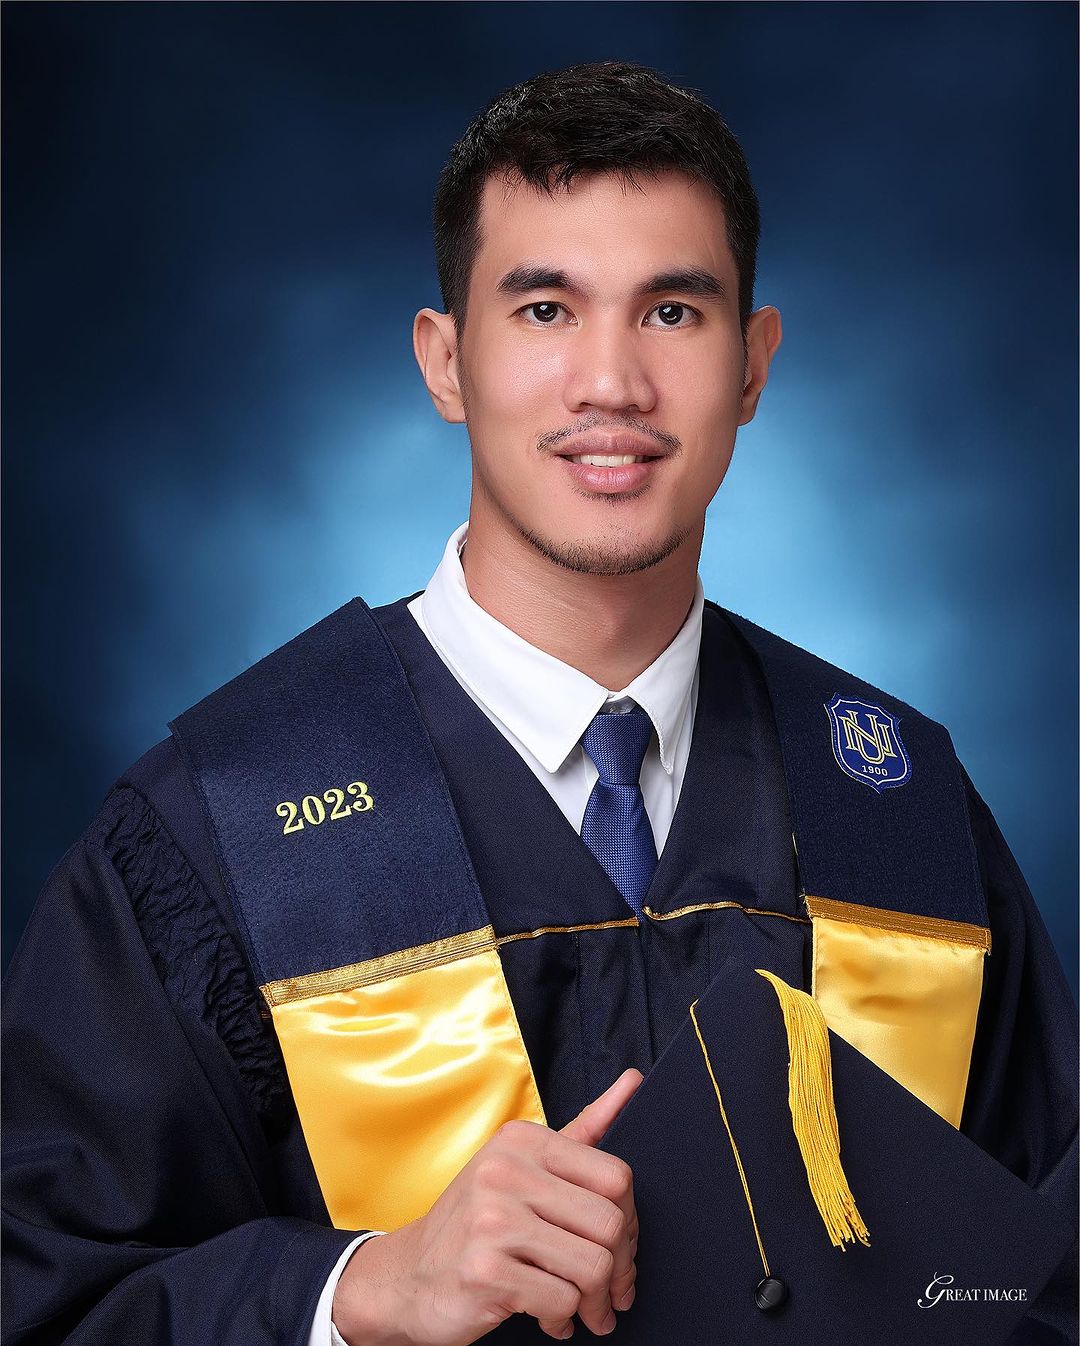 Photo of PBA player Troy Rosario wearing his graduation toga.